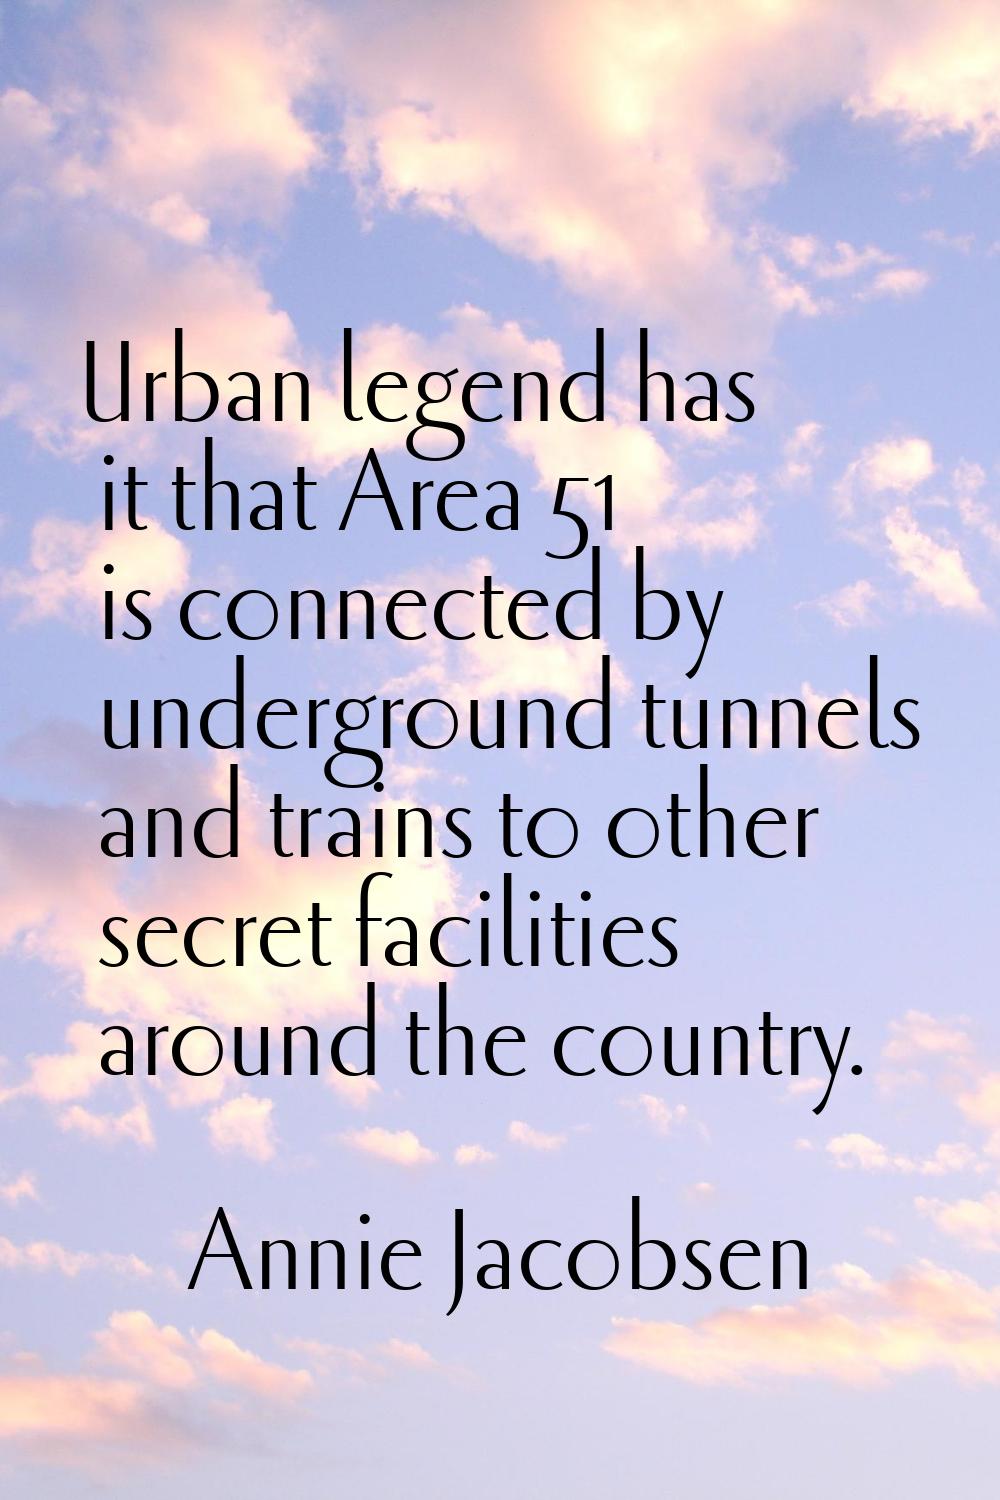 Urban legend has it that Area 51 is connected by underground tunnels and trains to other secret fac